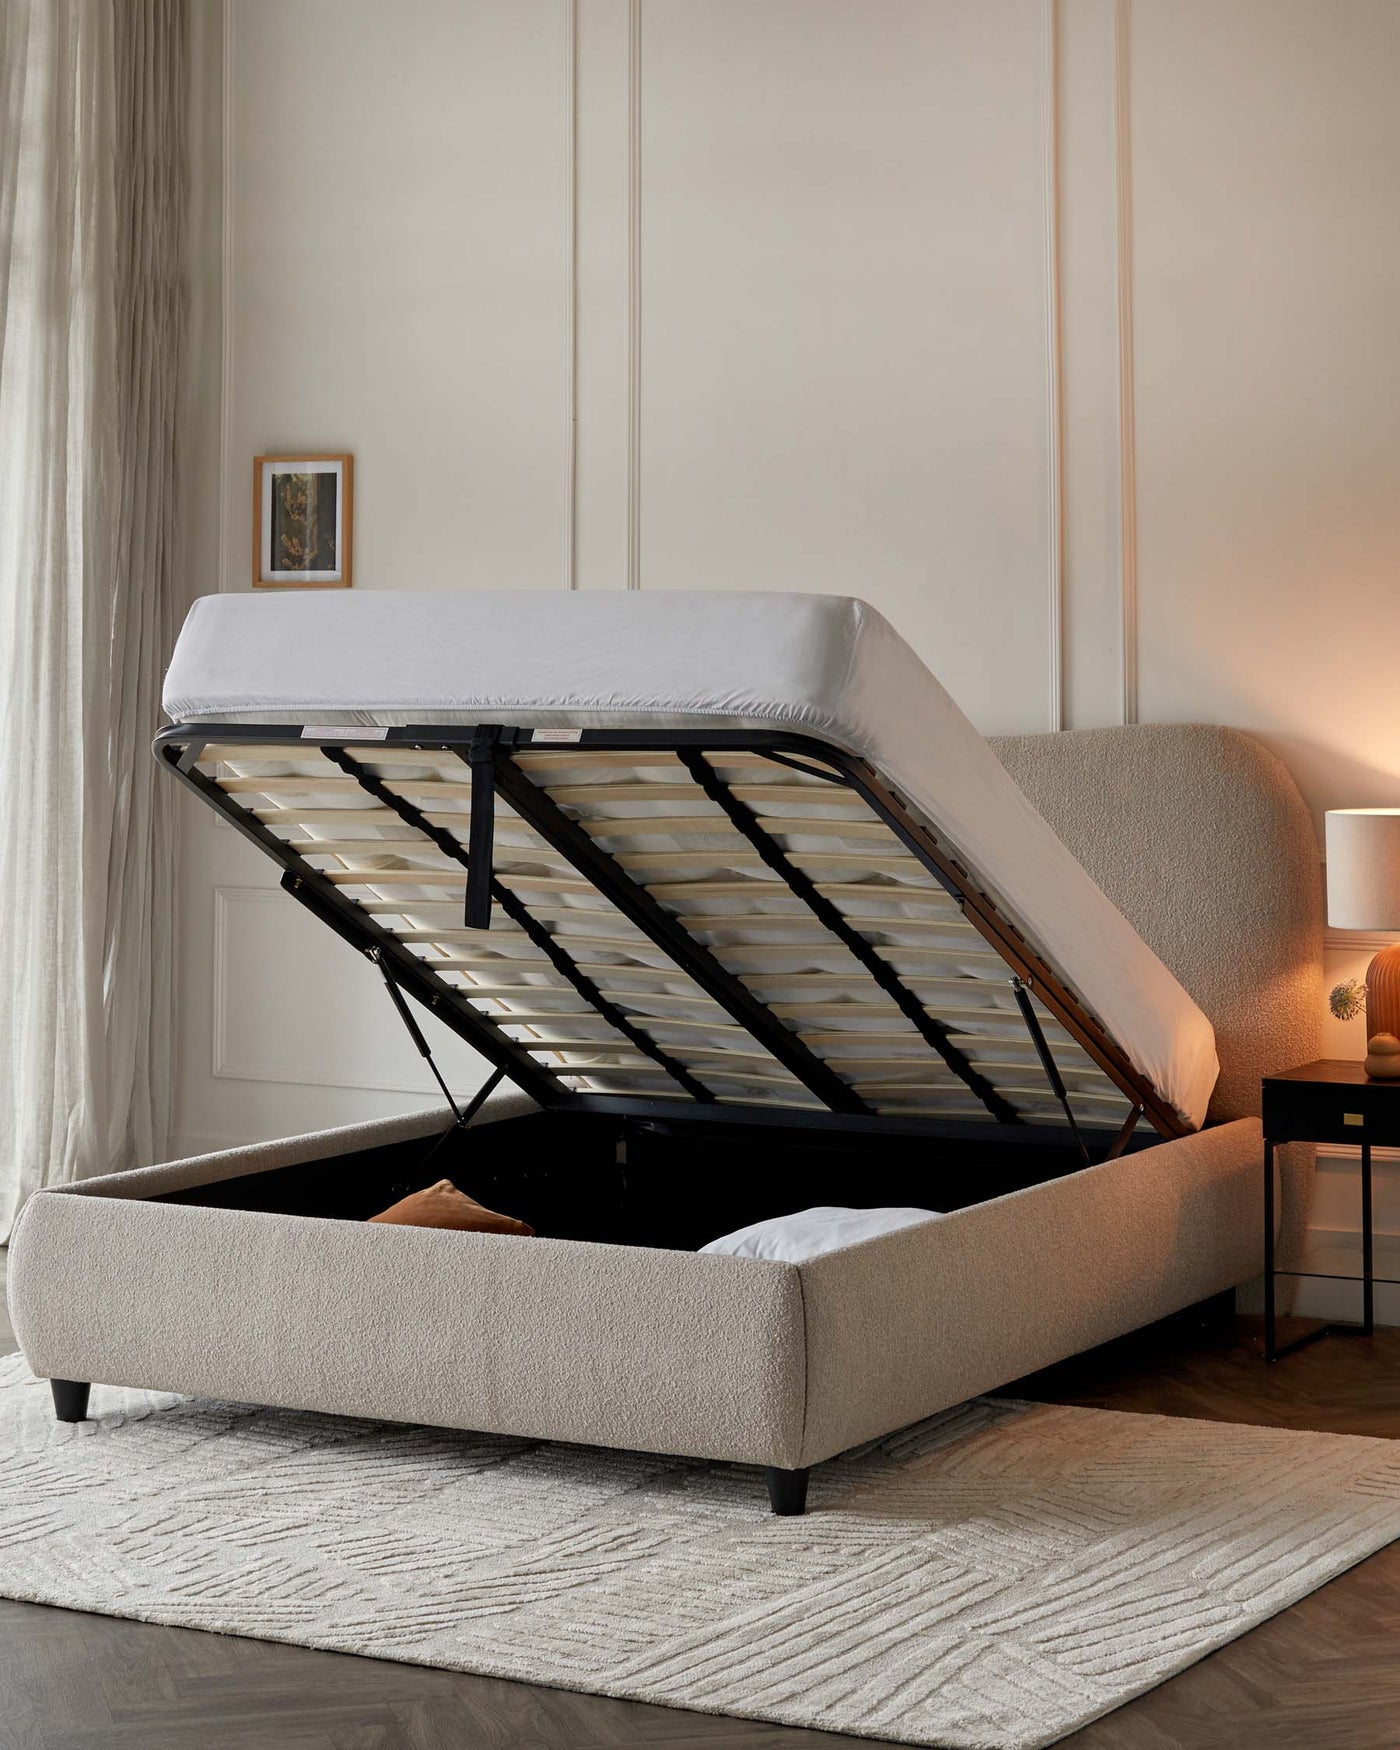 A contemporary upholstered storage bed with a lifted mattress base revealing ample under-bed storage, placed on a textured rug in a softly lit room, accompanied by a small black bedside table and a glowing table lamp.